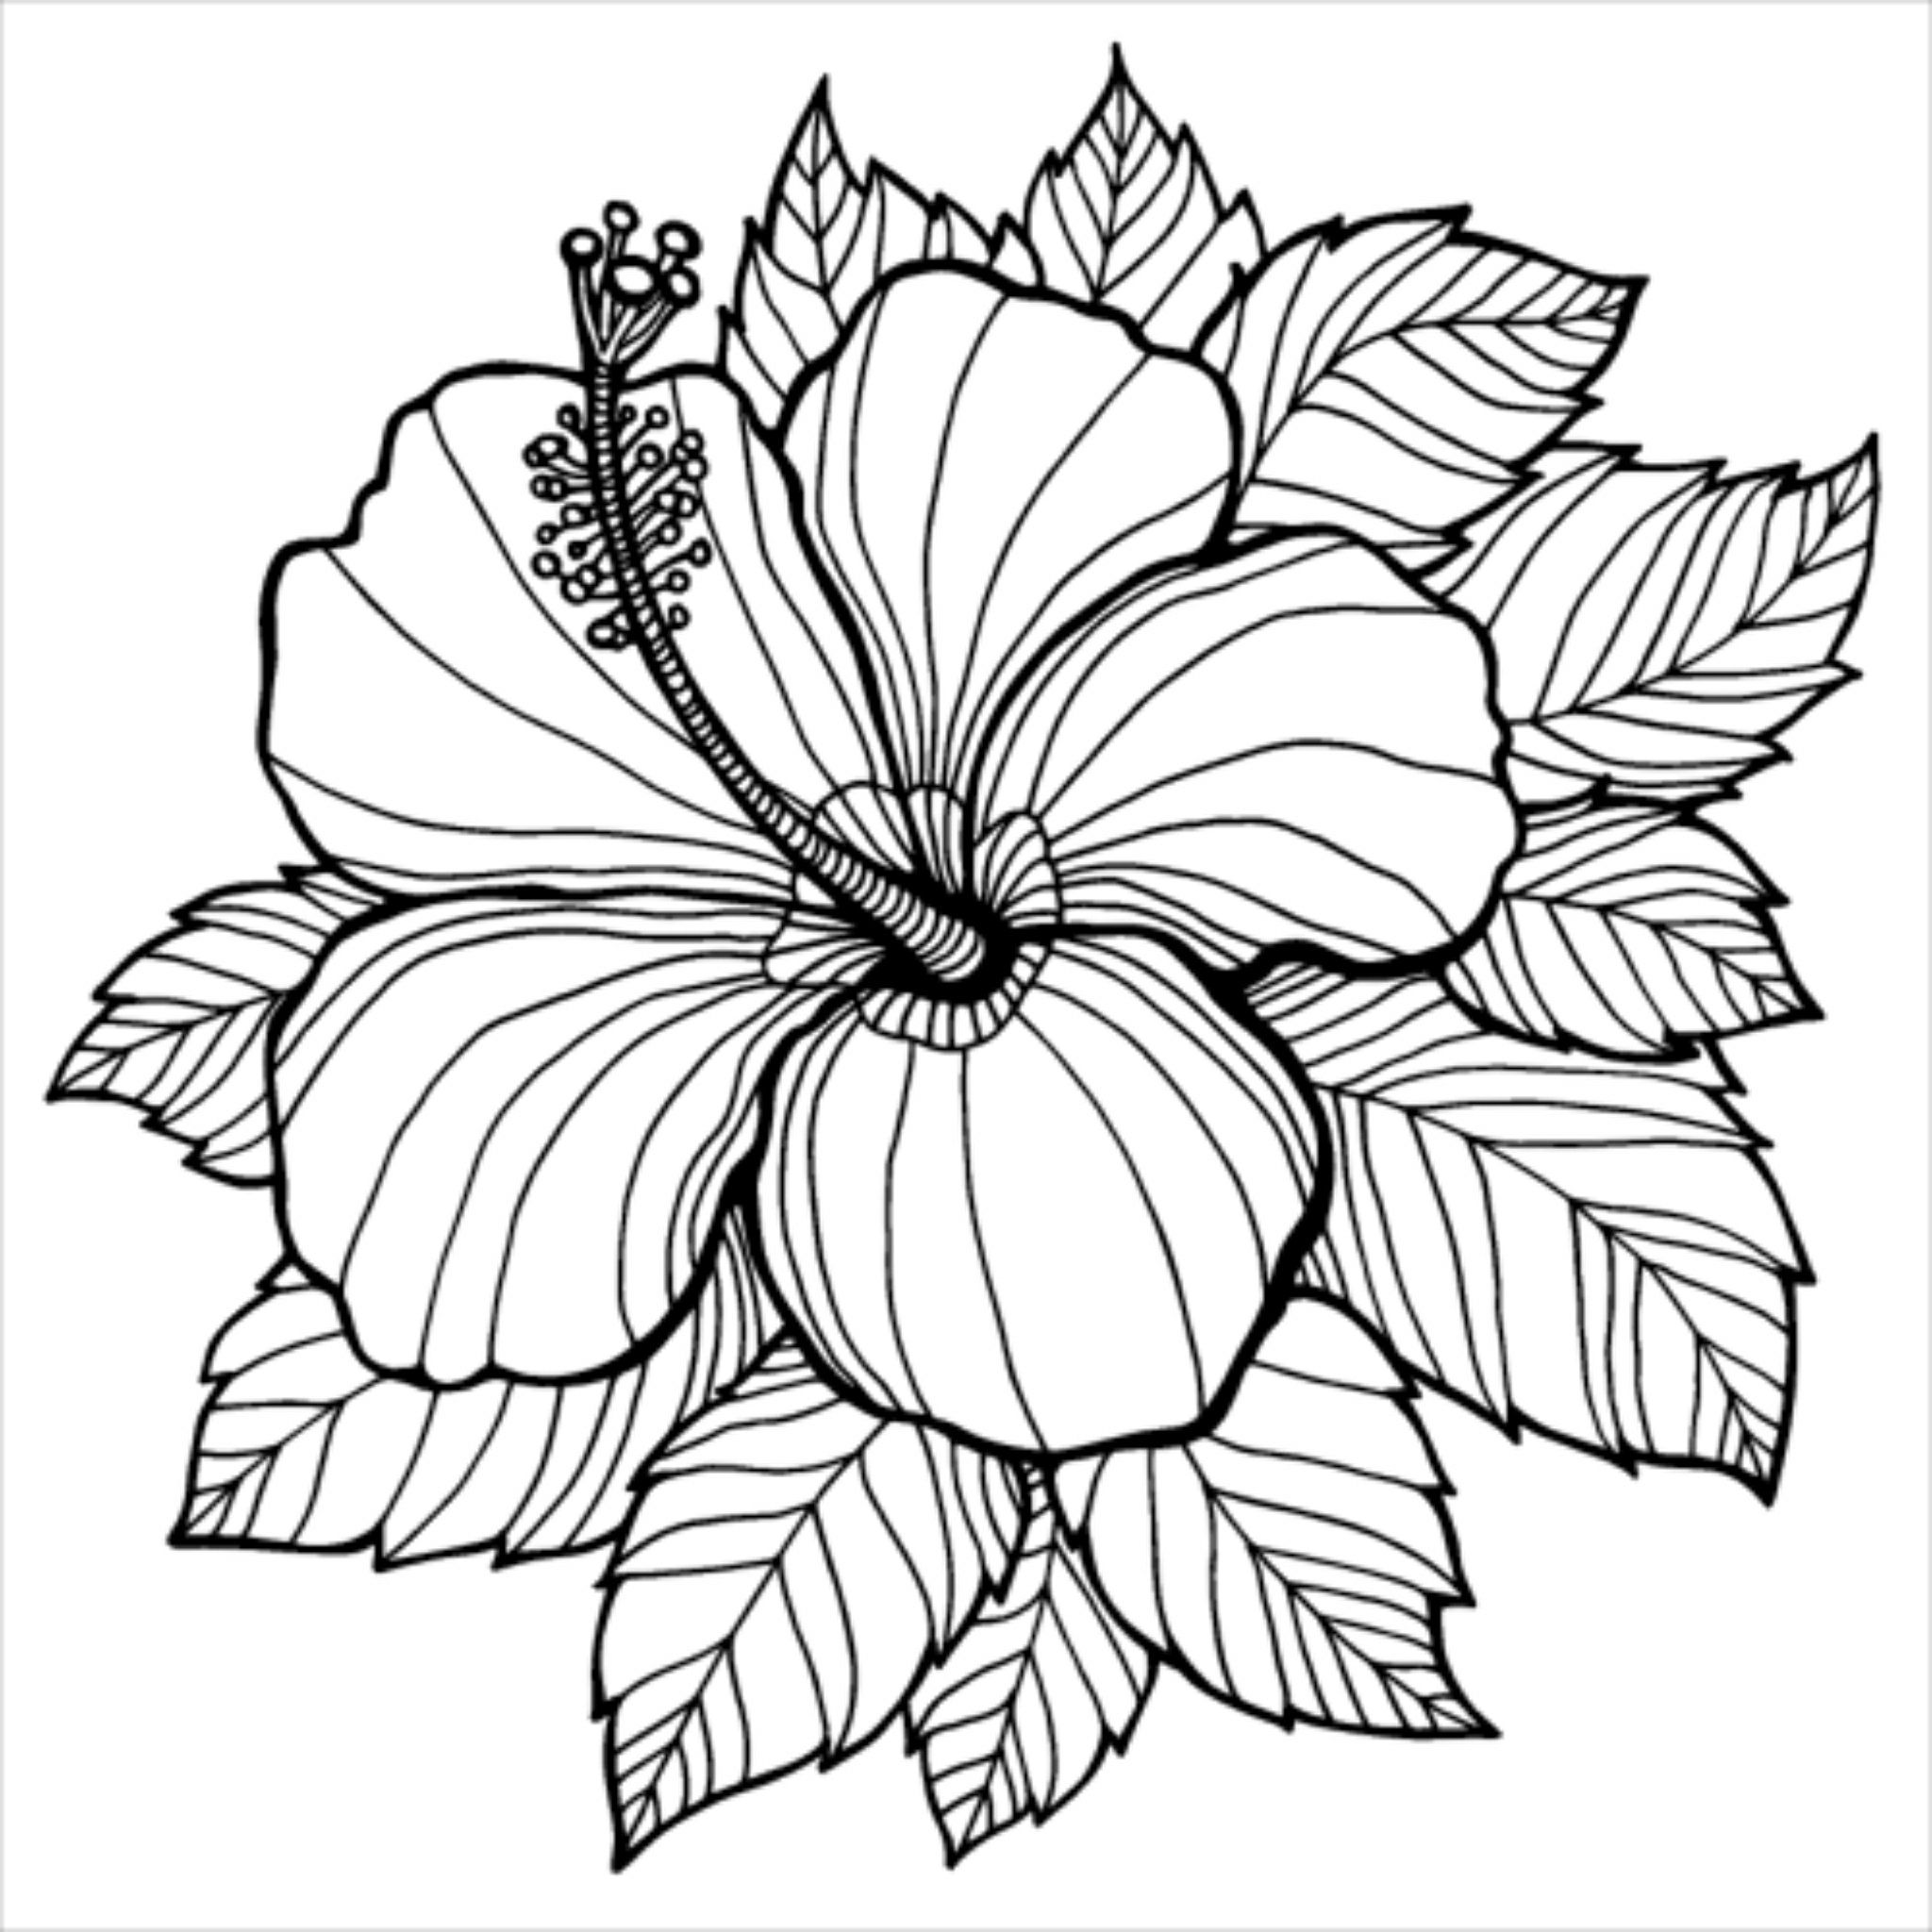 Hibiscus Flower Coloring Page - Feedthefightbos